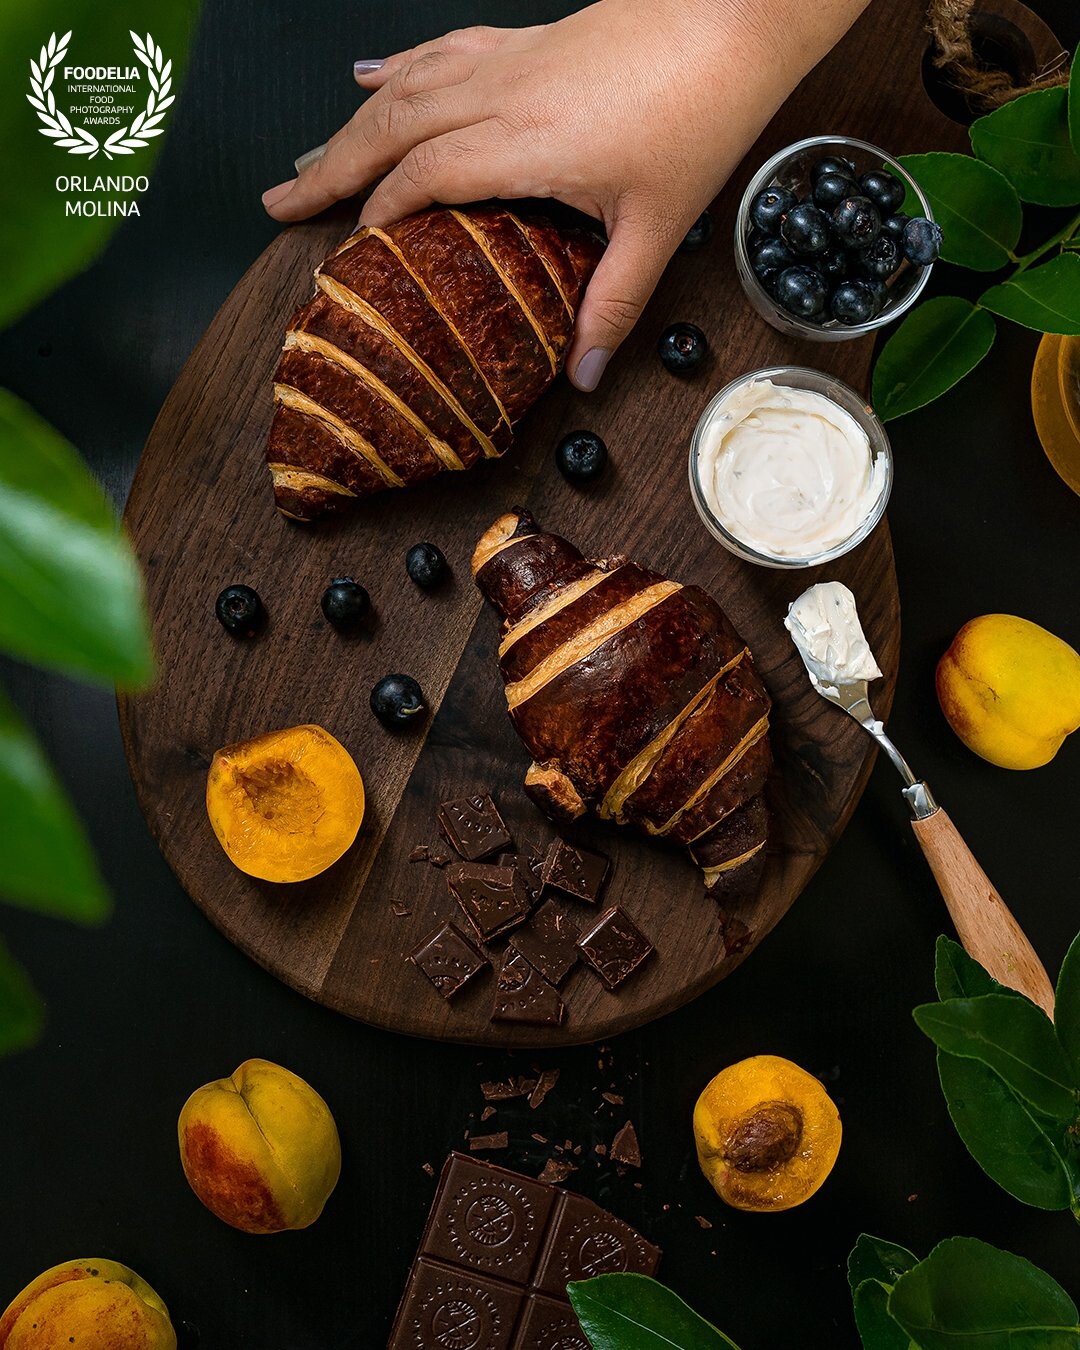 Nutella Croissants with berries, cream cheese chocolate and peach. The perfect combination in food photography and for eating it after the shoot! :)